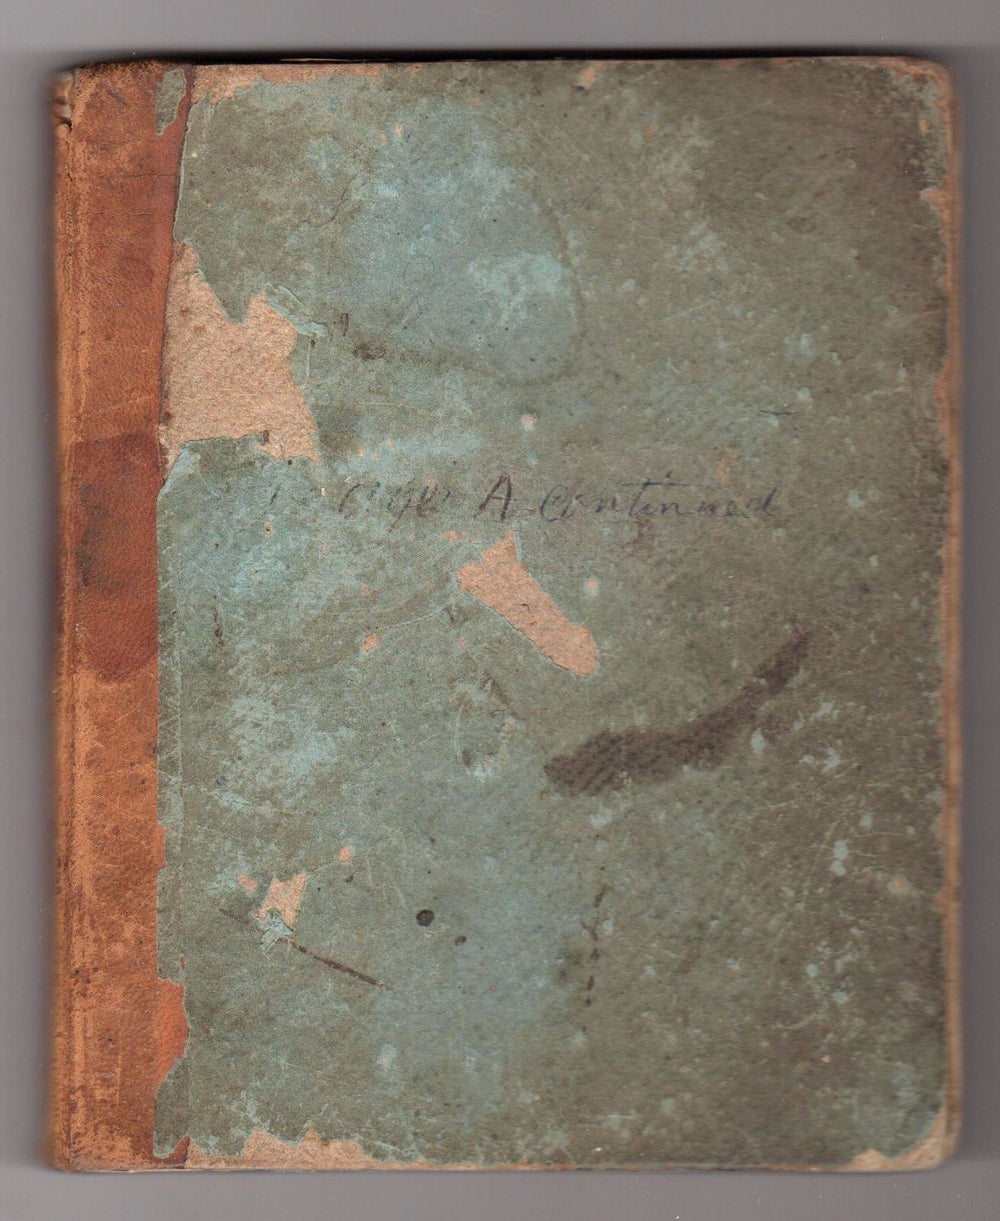 New Hampshire Doctors & Civil War Country General Store Medical Ledger Book 1840 - K-townConsignments